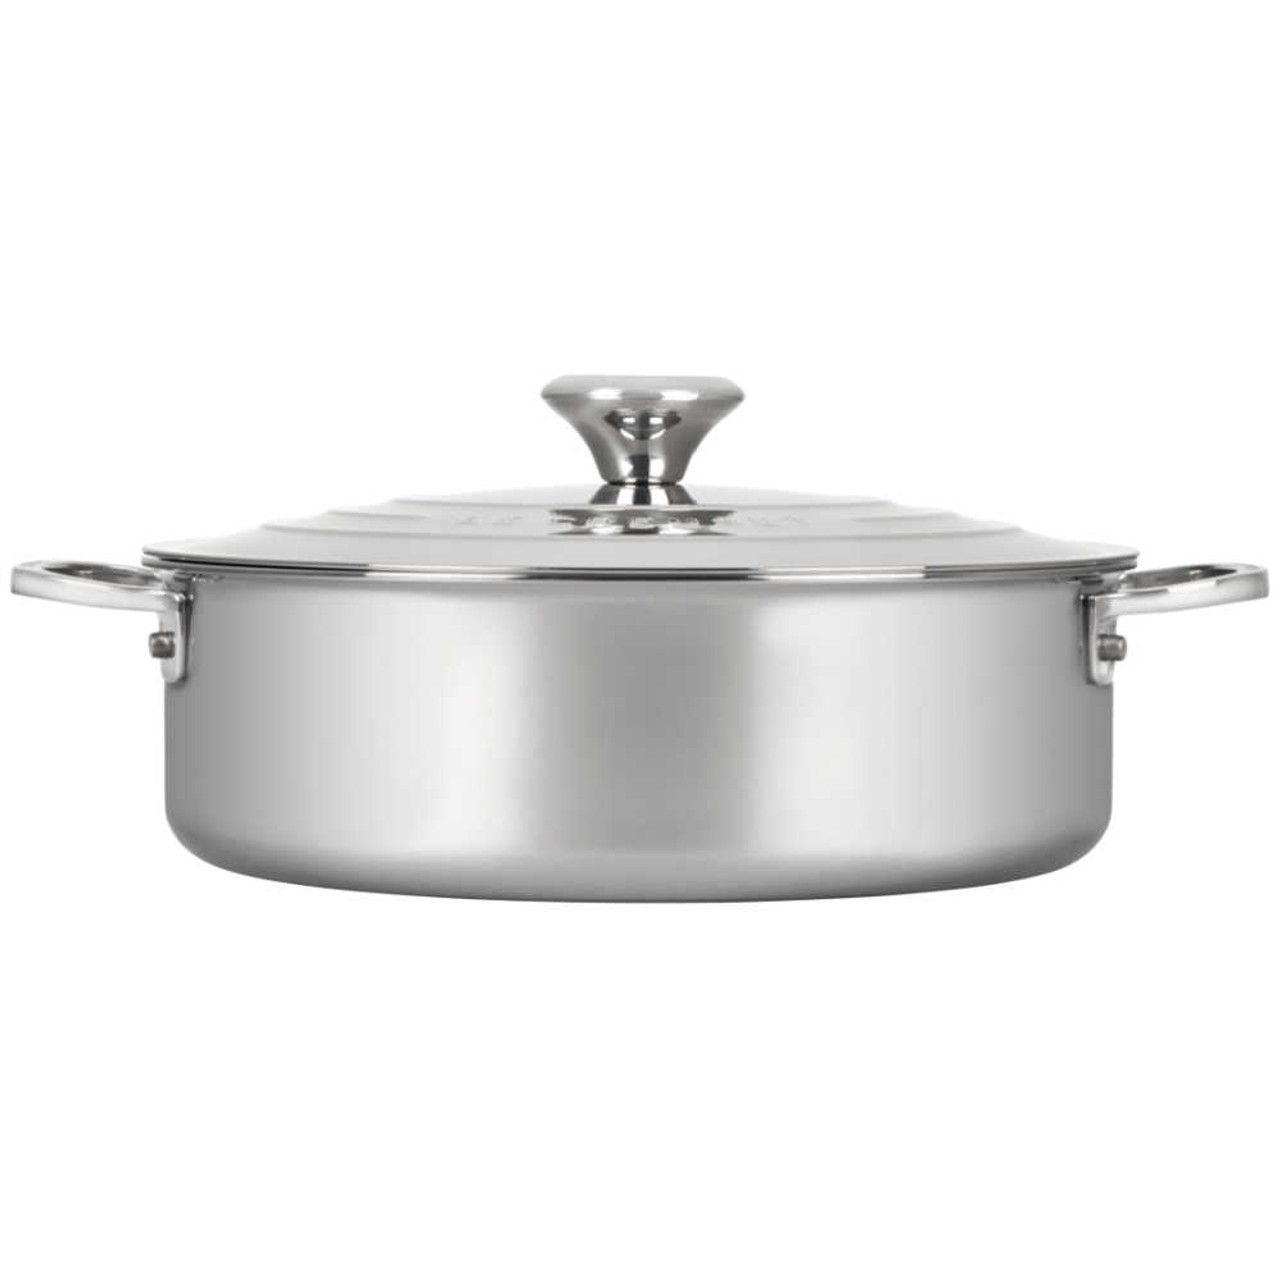 https://cdn11.bigcommerce.com/s-hccytny0od/images/stencil/1280x1280/products/4210/15881/le-creuset-stainless-steel-rondeau-pan-2__53579.1628829370.jpg?c=2?imbypass=on